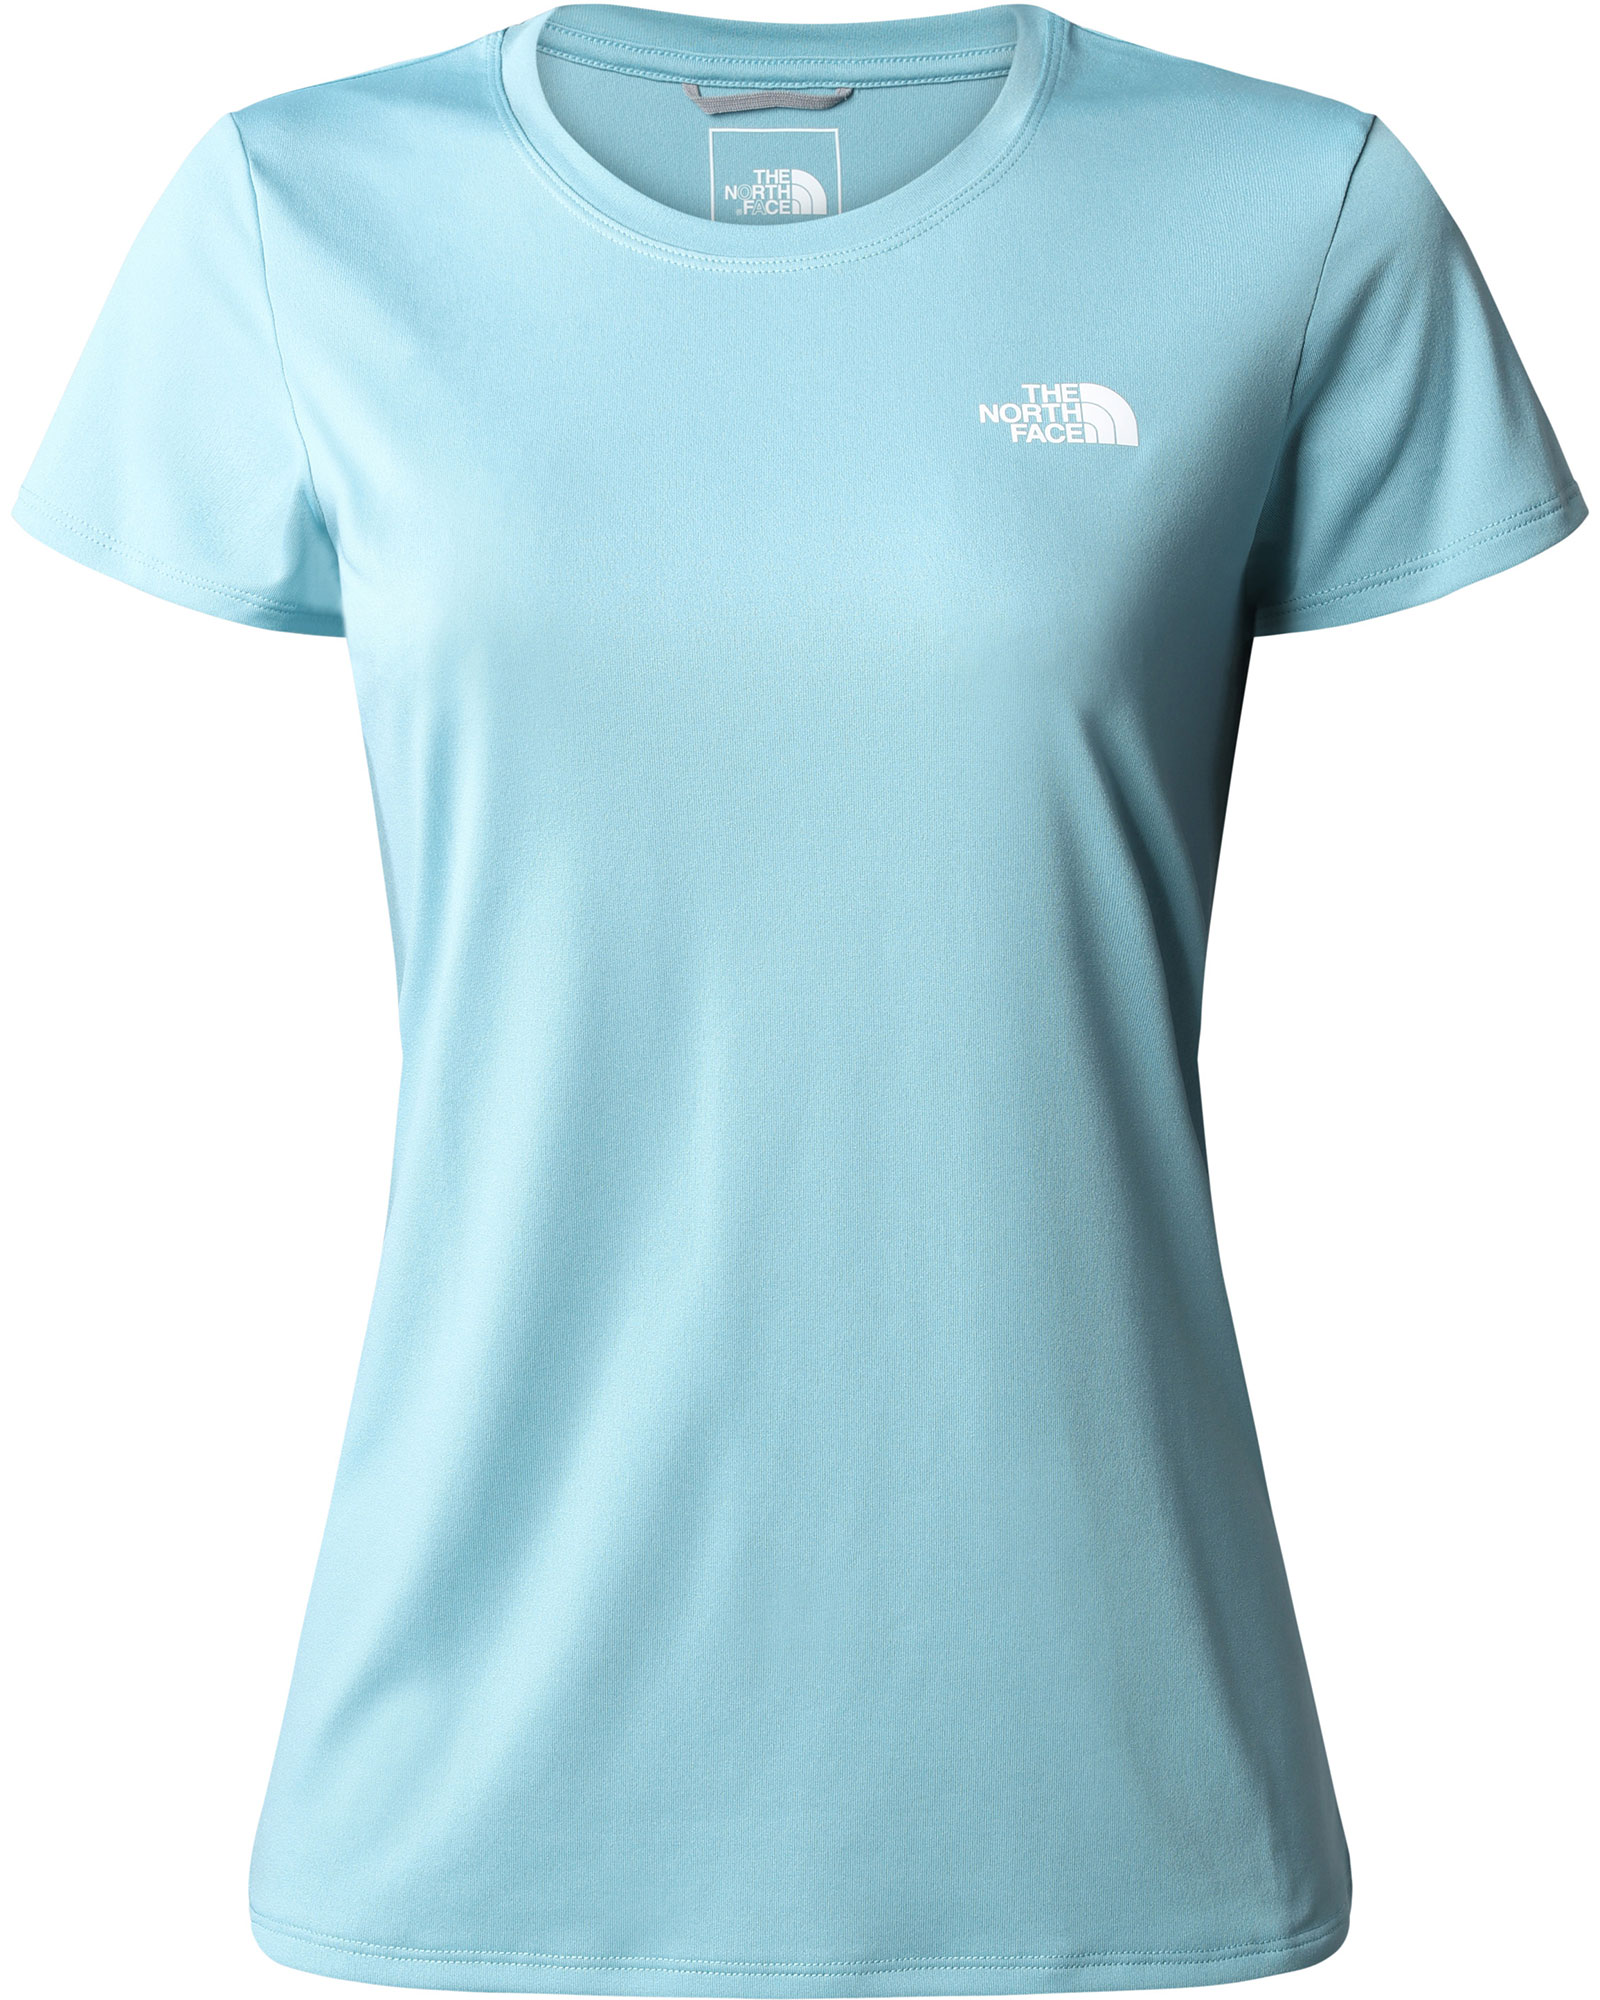 The North Face Reaxion Amp Women’s Crew T Shirt - Reef Waters L